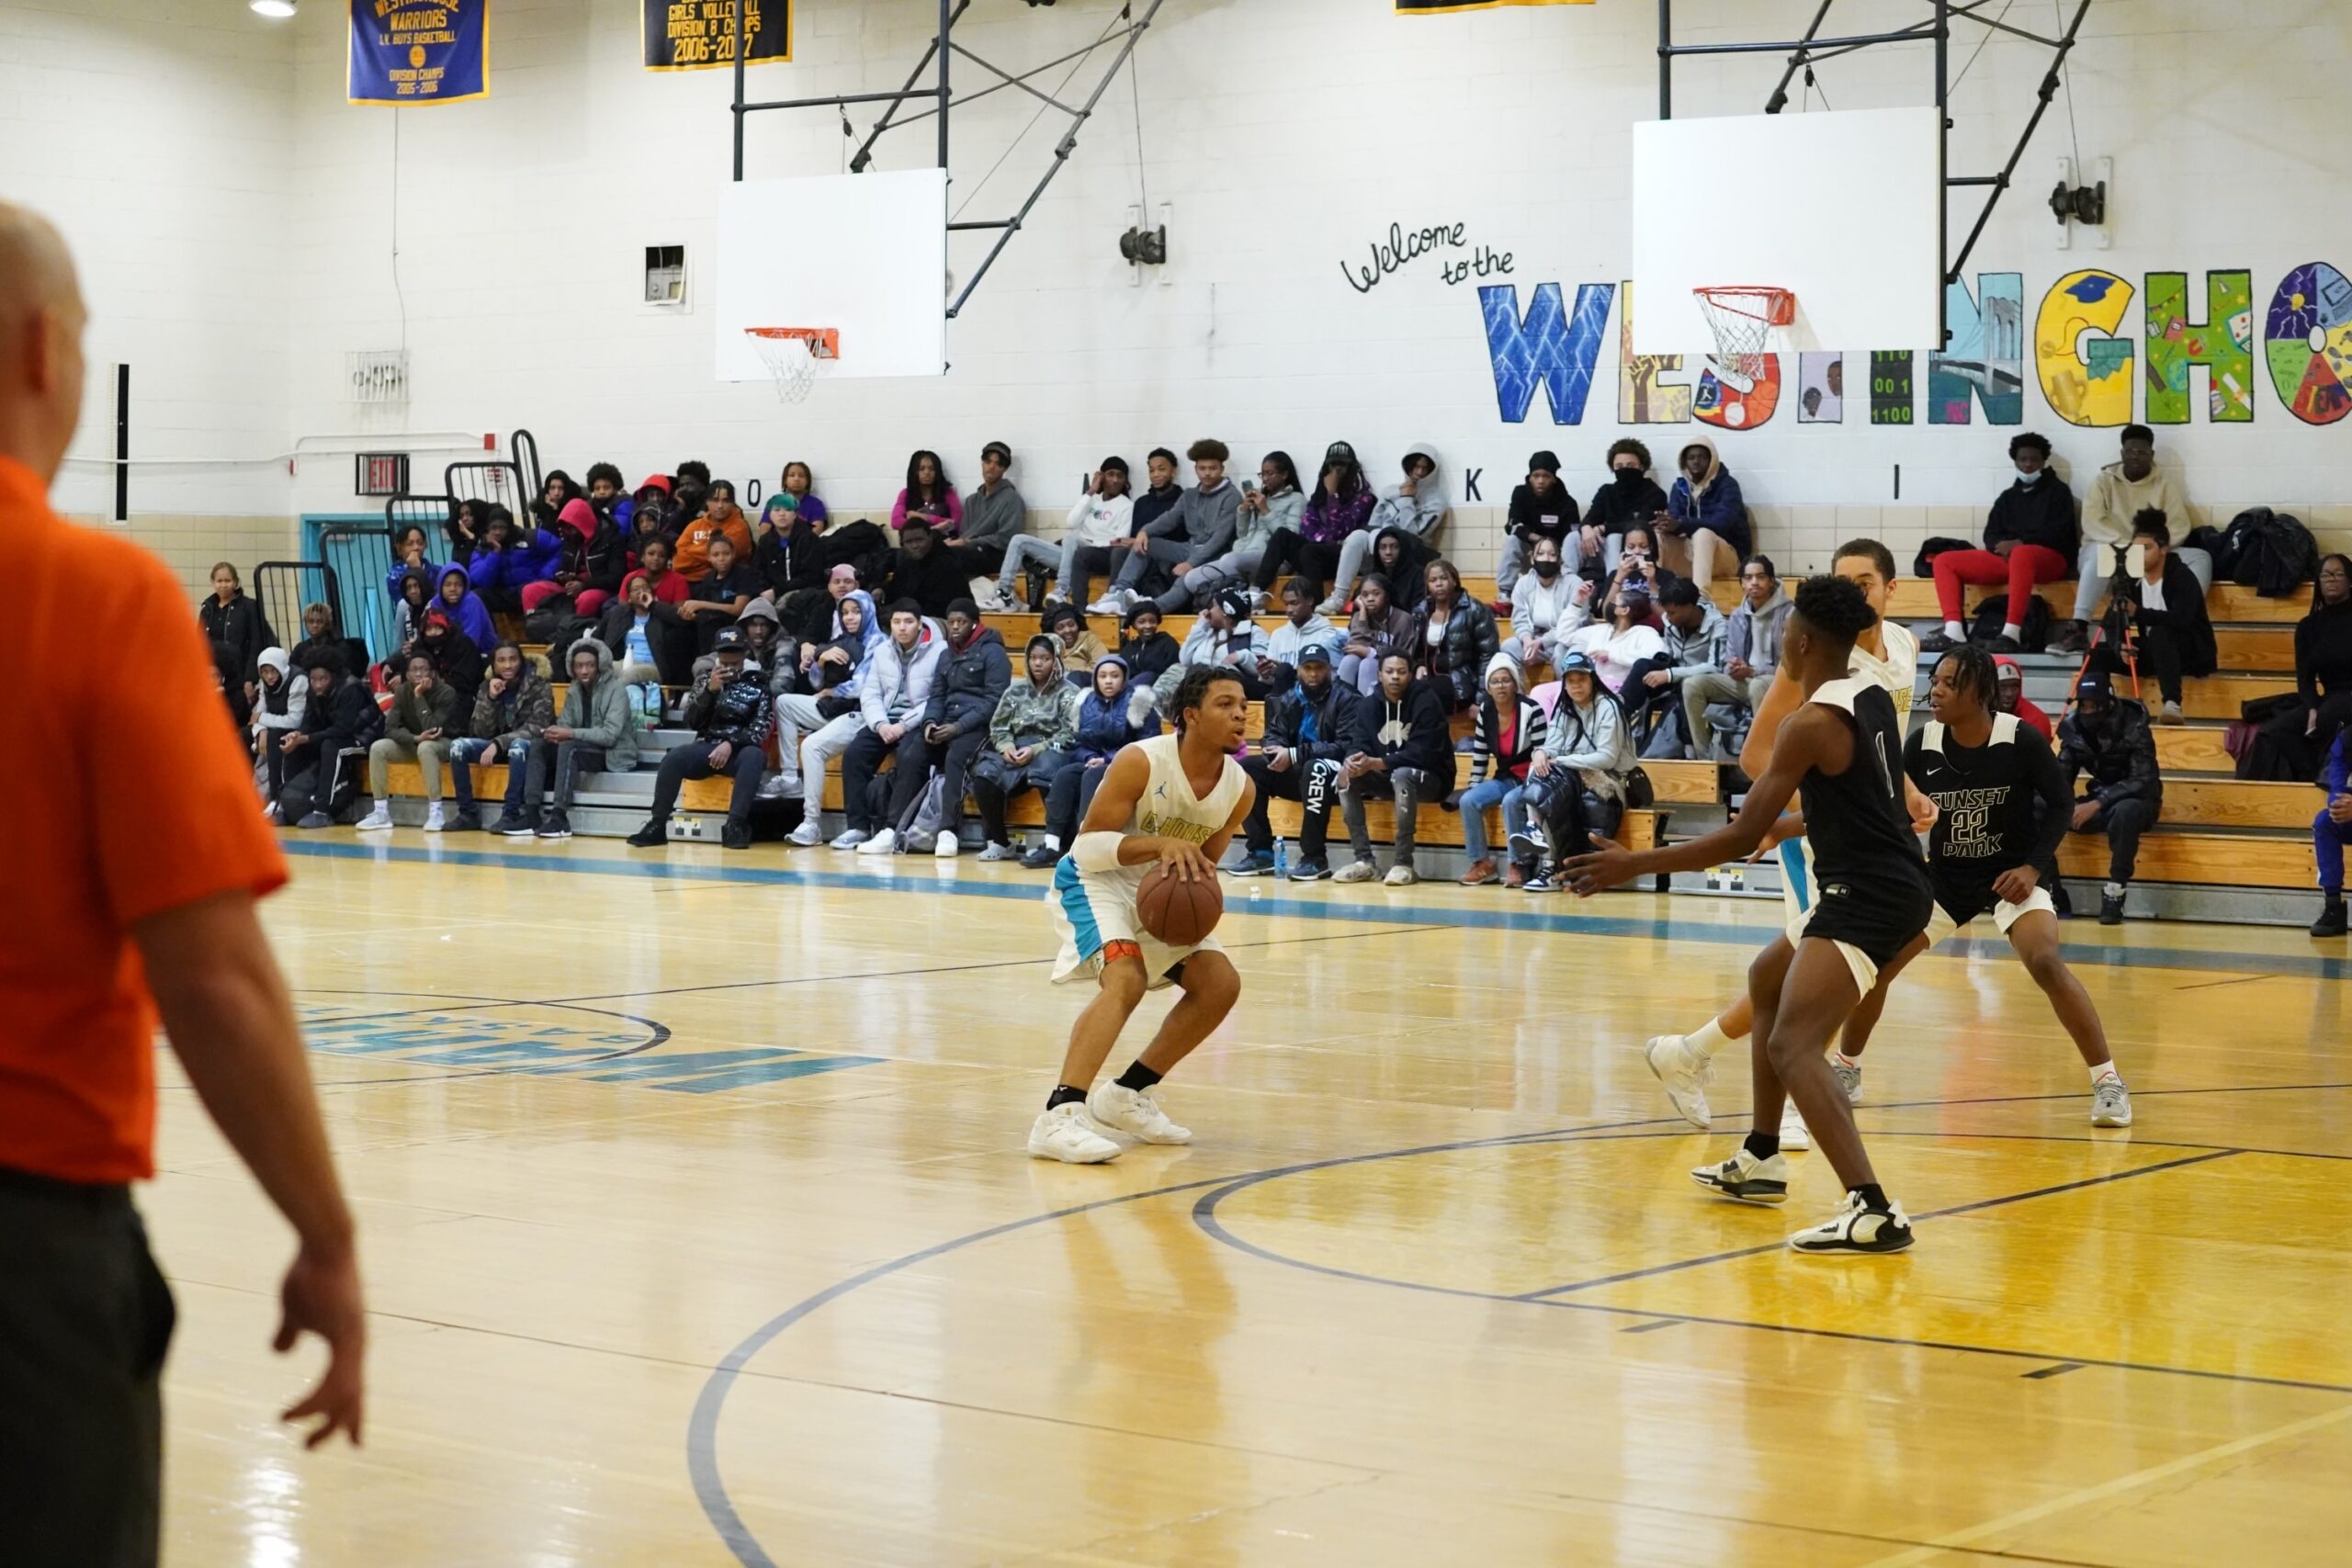 A George Westinghouse basketball game.